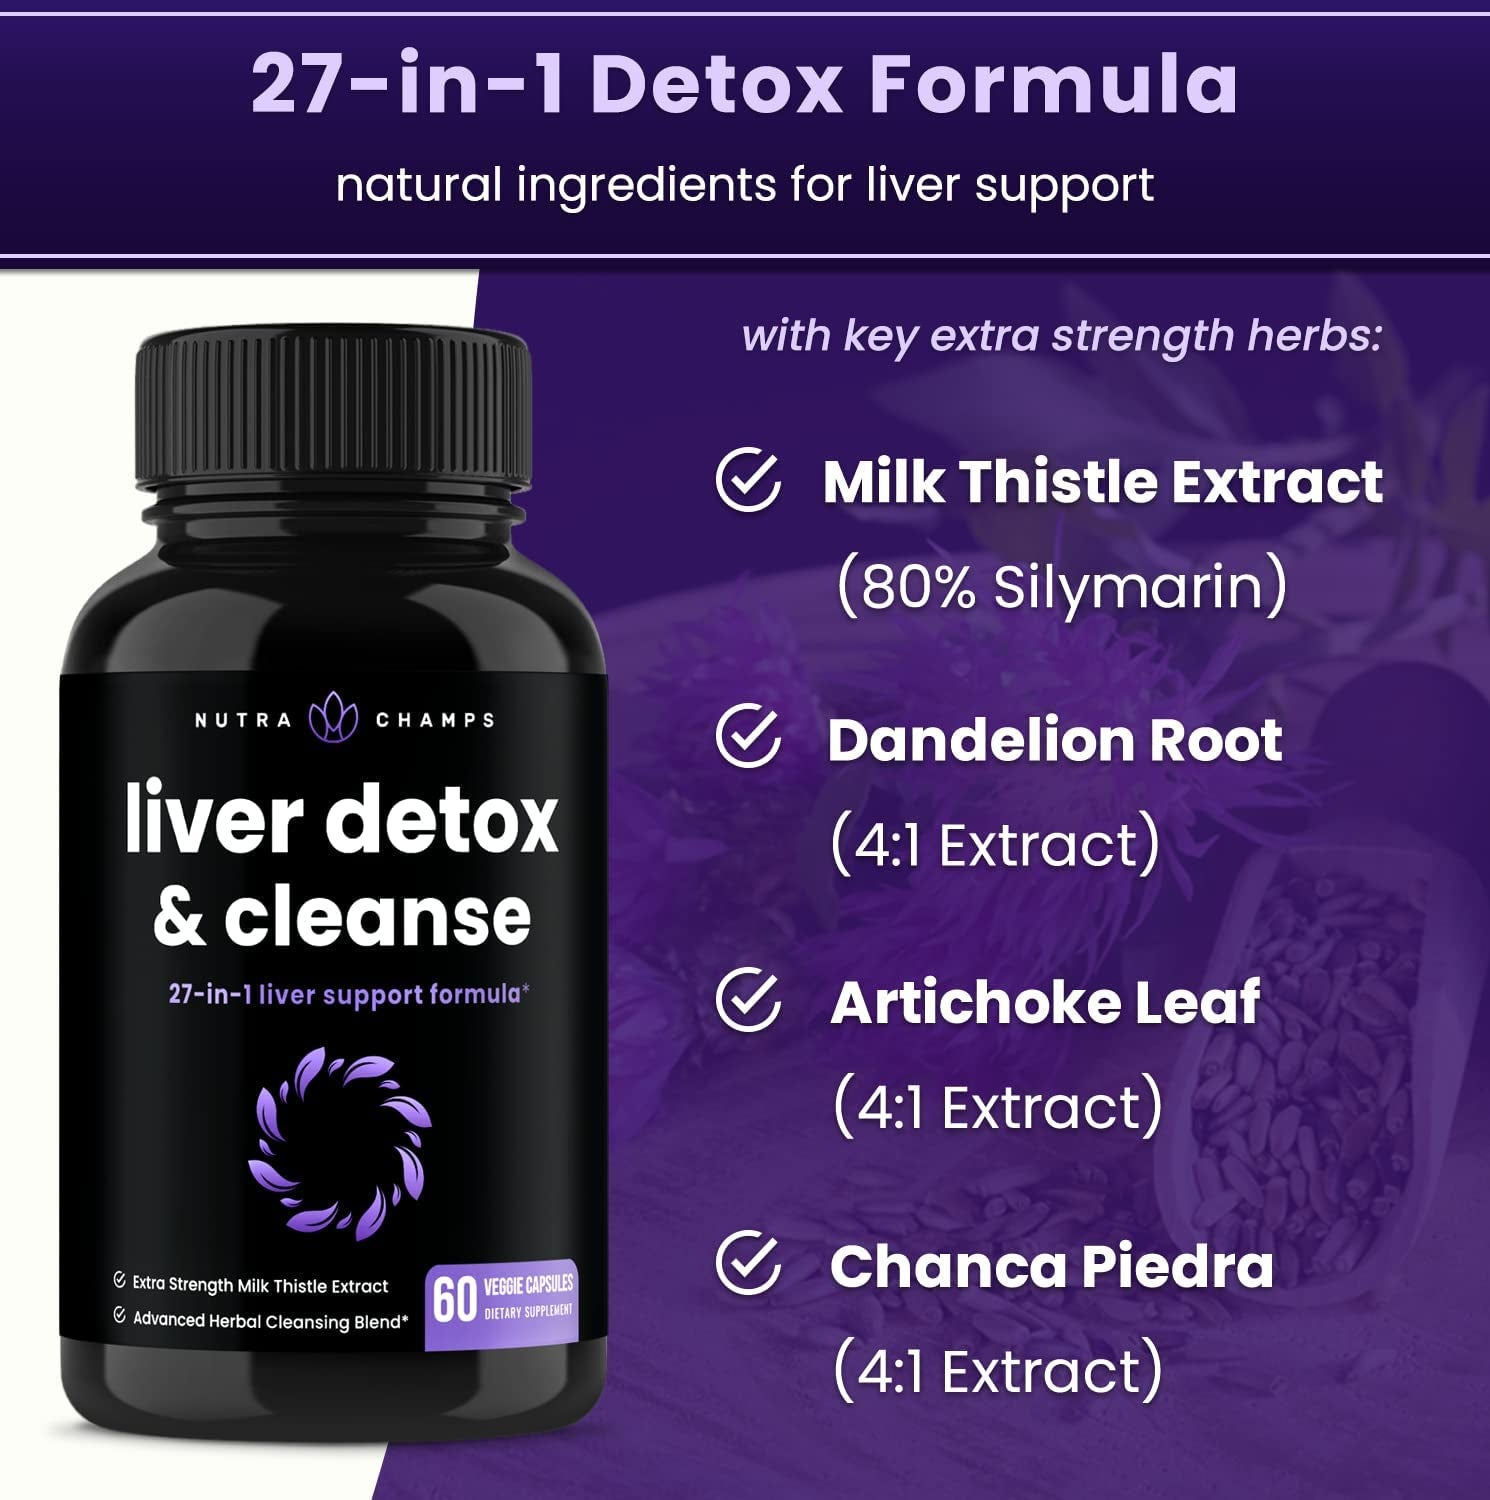 Nutrachamps Liver Cleanse Detox and Black Seed Oil Capsules Bundle